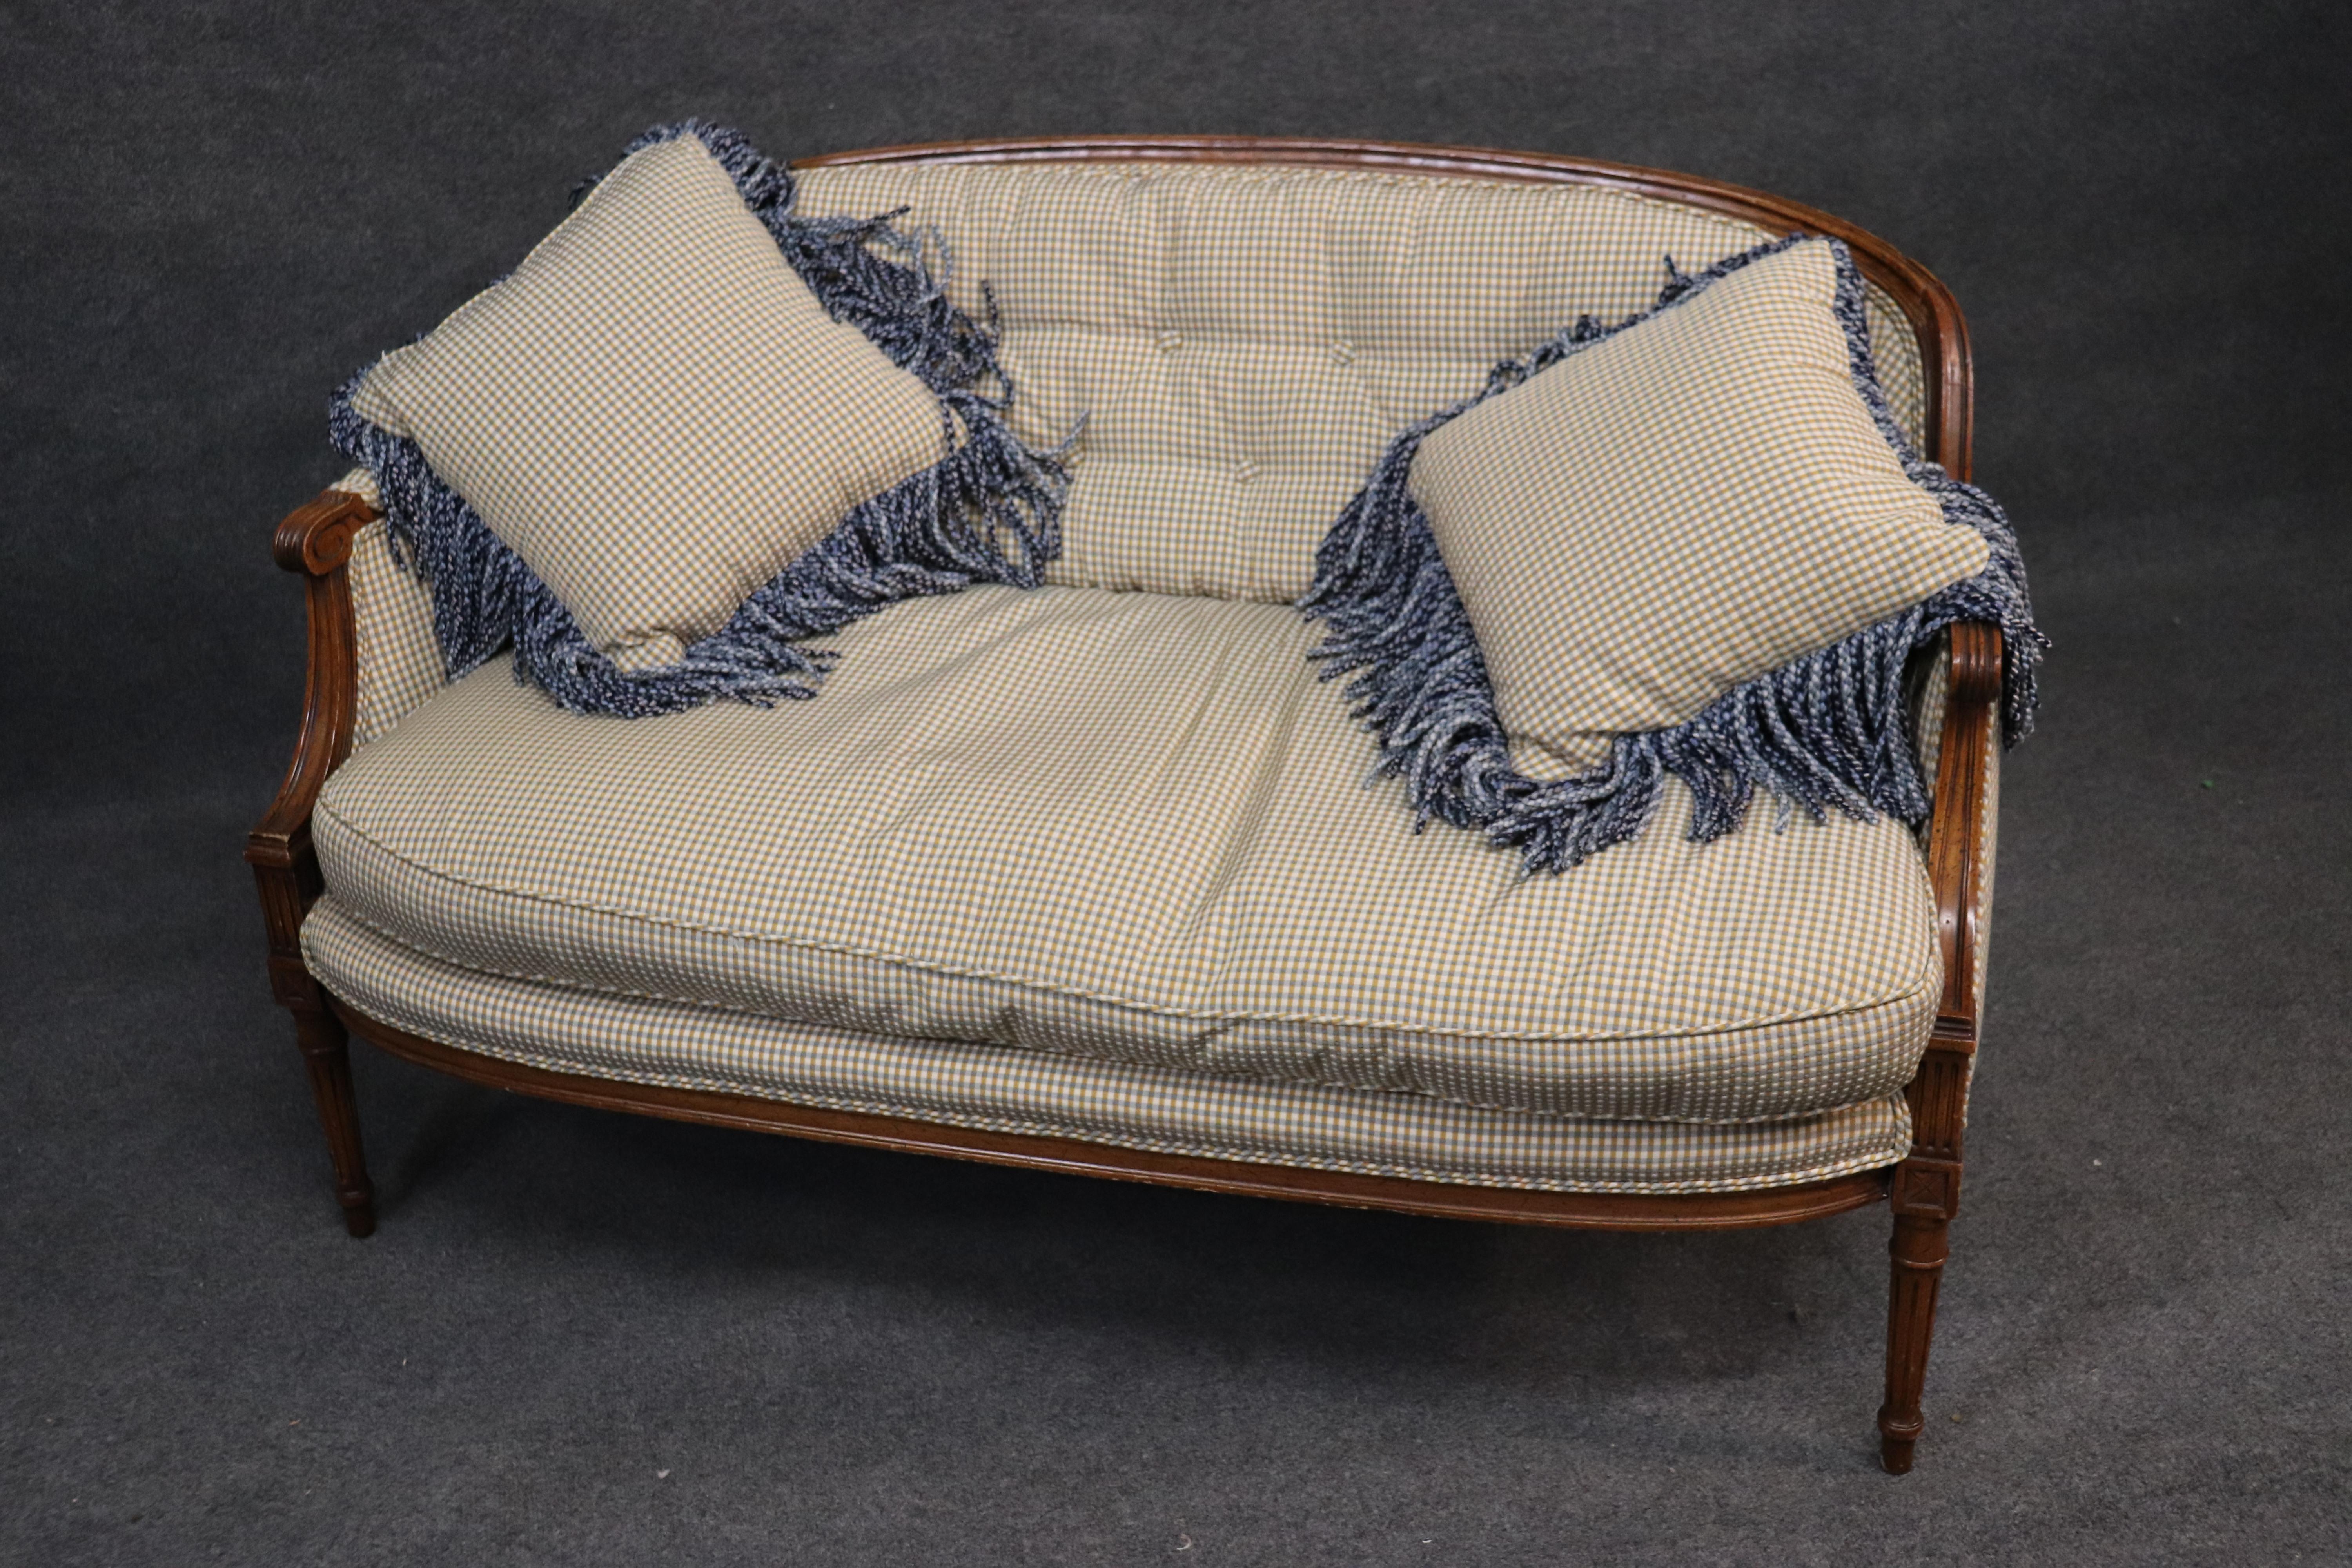 Mid-20th Century French Louis XV Carved Walnut Settee Canape Sofa with Matching Pillows